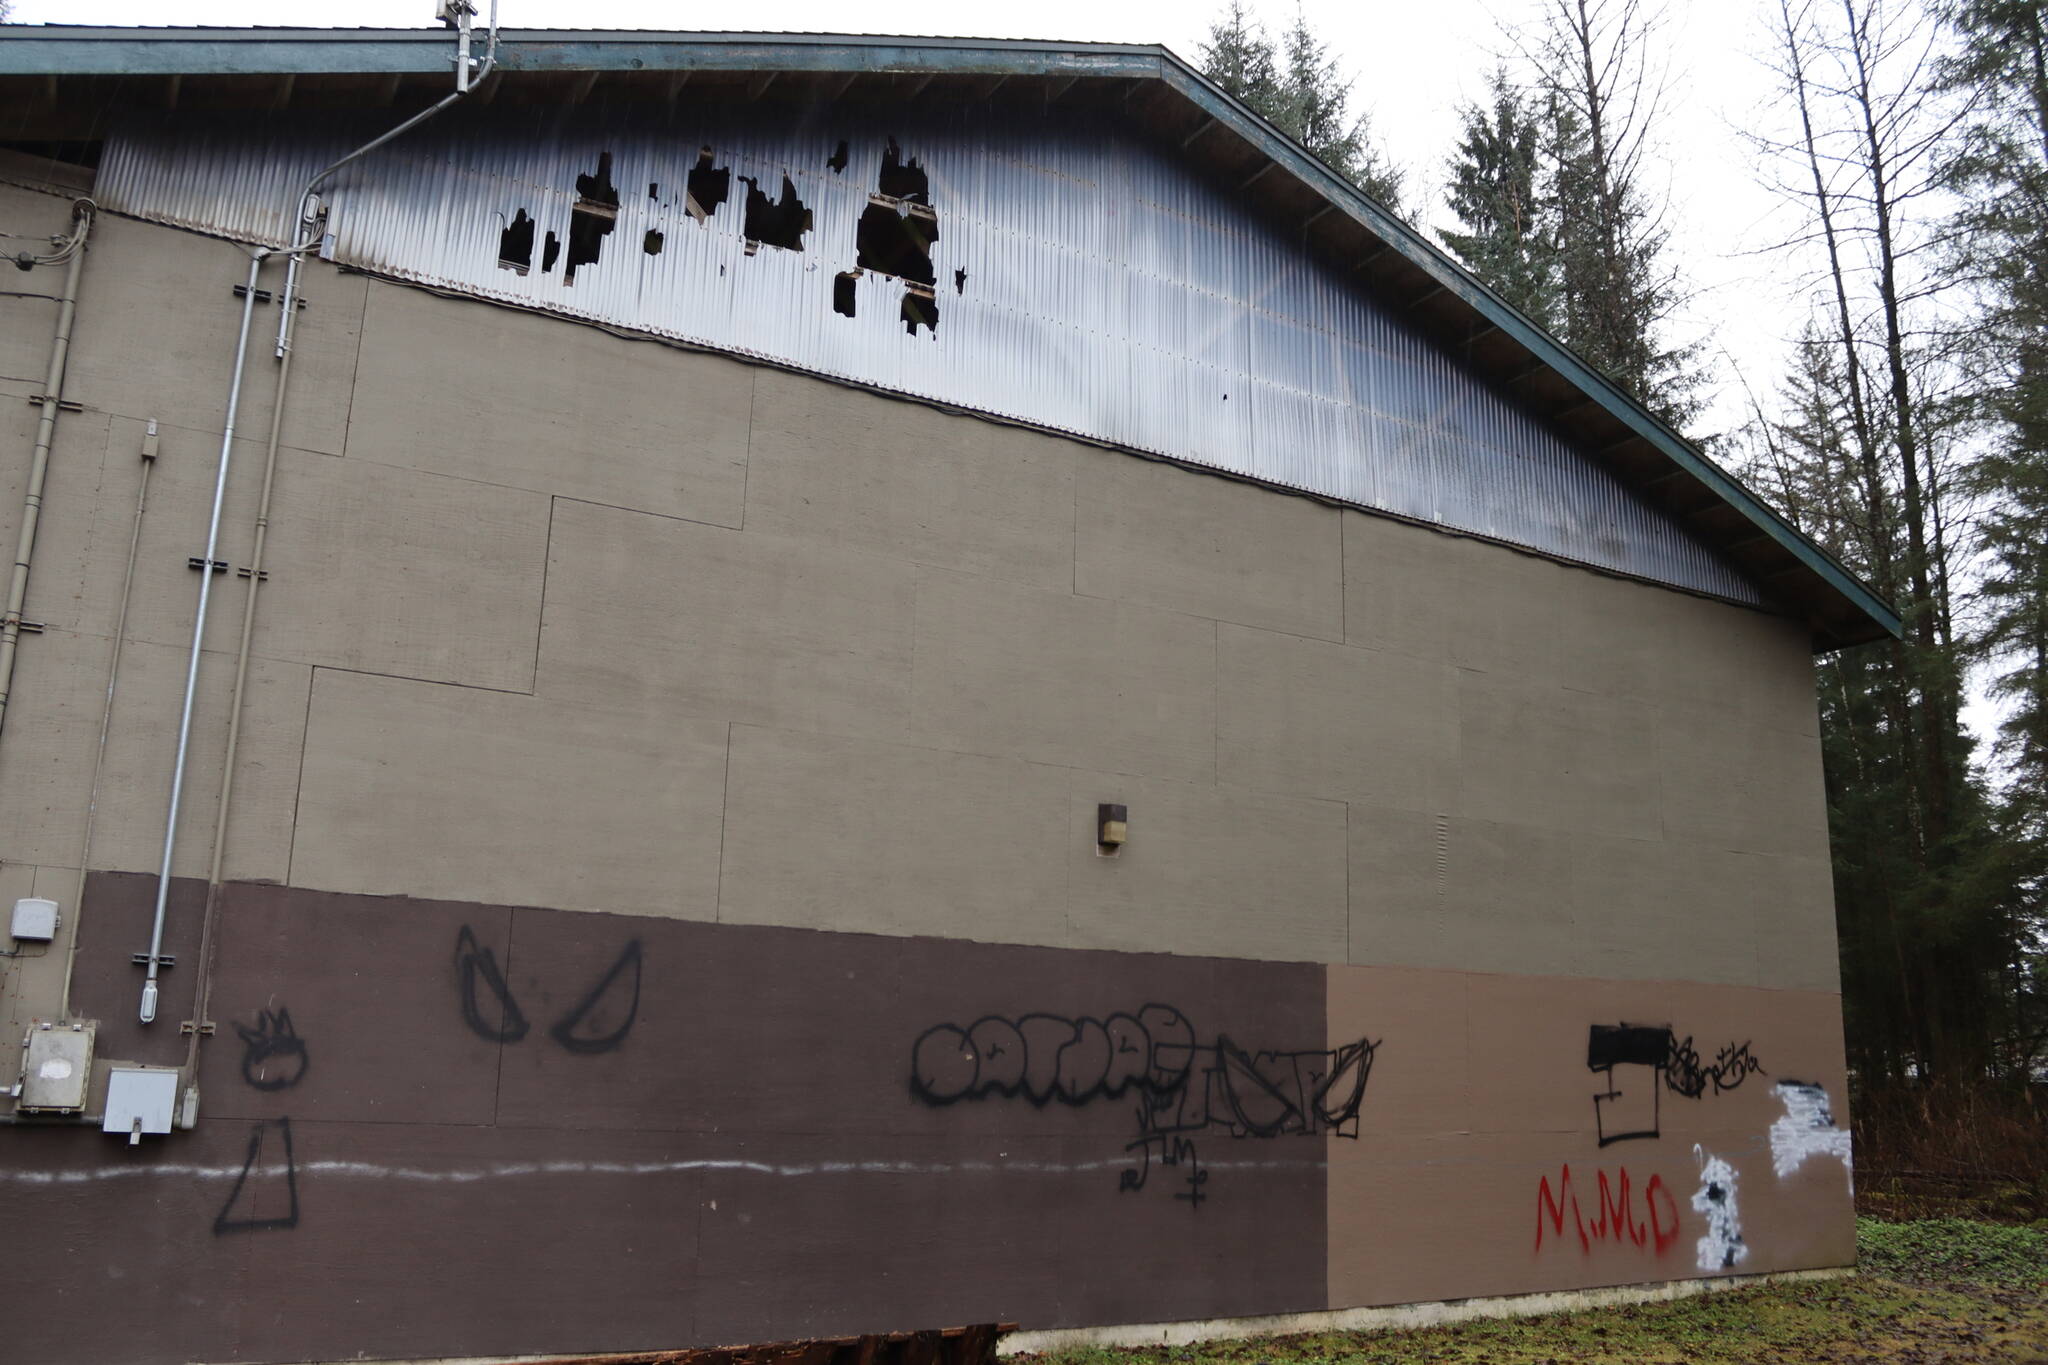 Graffiti and damage to an upper part of the Pipeline Skate Park observed at midday Thursday. (Mark Sabbatini / Juneau Empire)